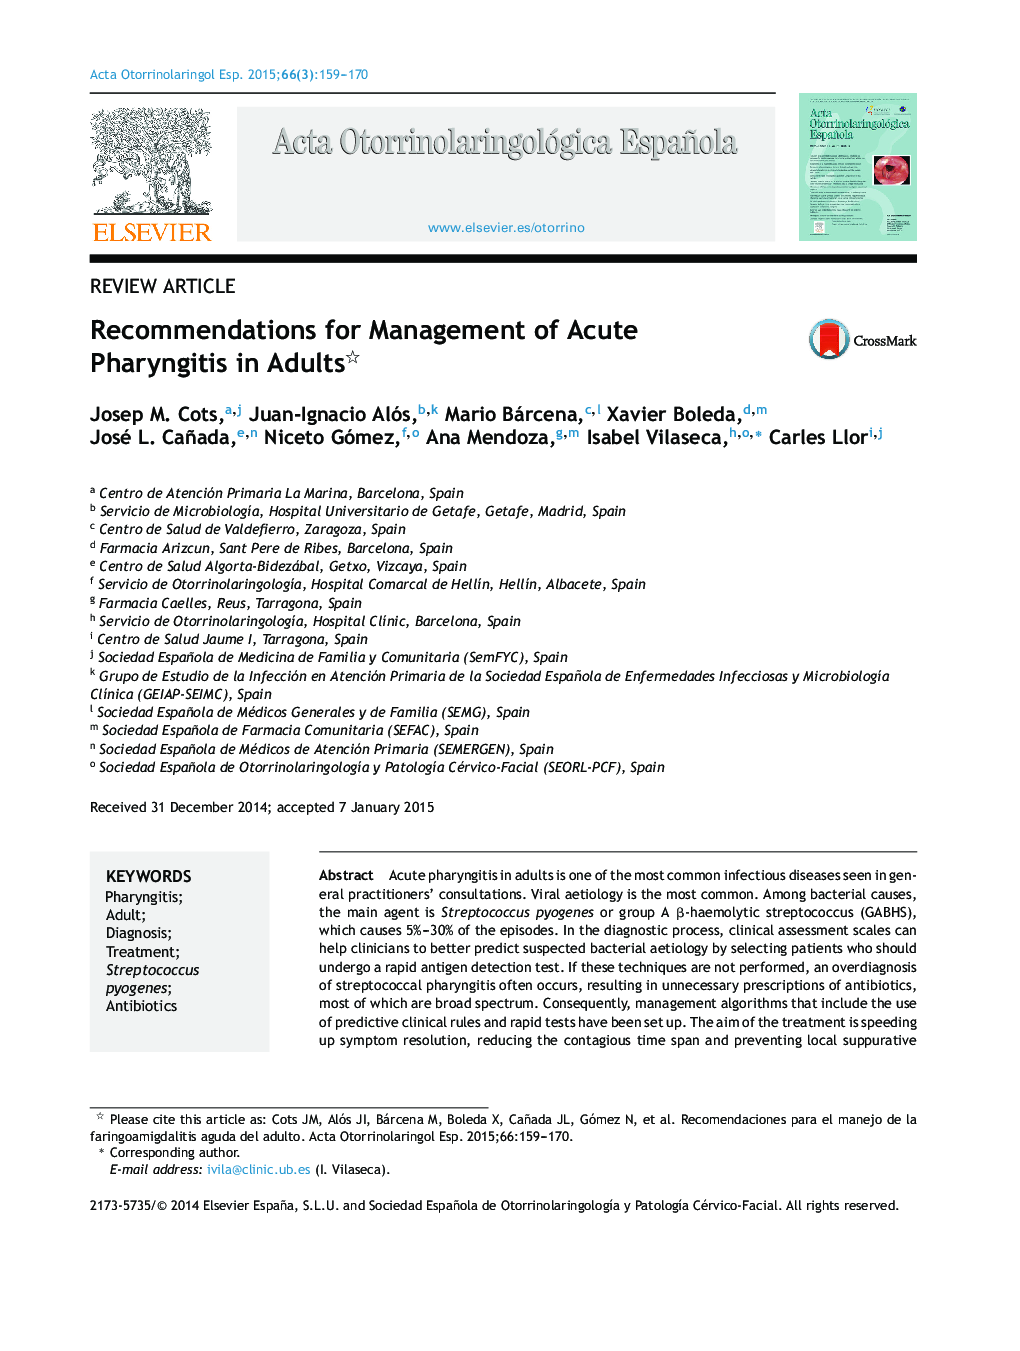 Recommendations for Management of Acute Pharyngitis in Adults 